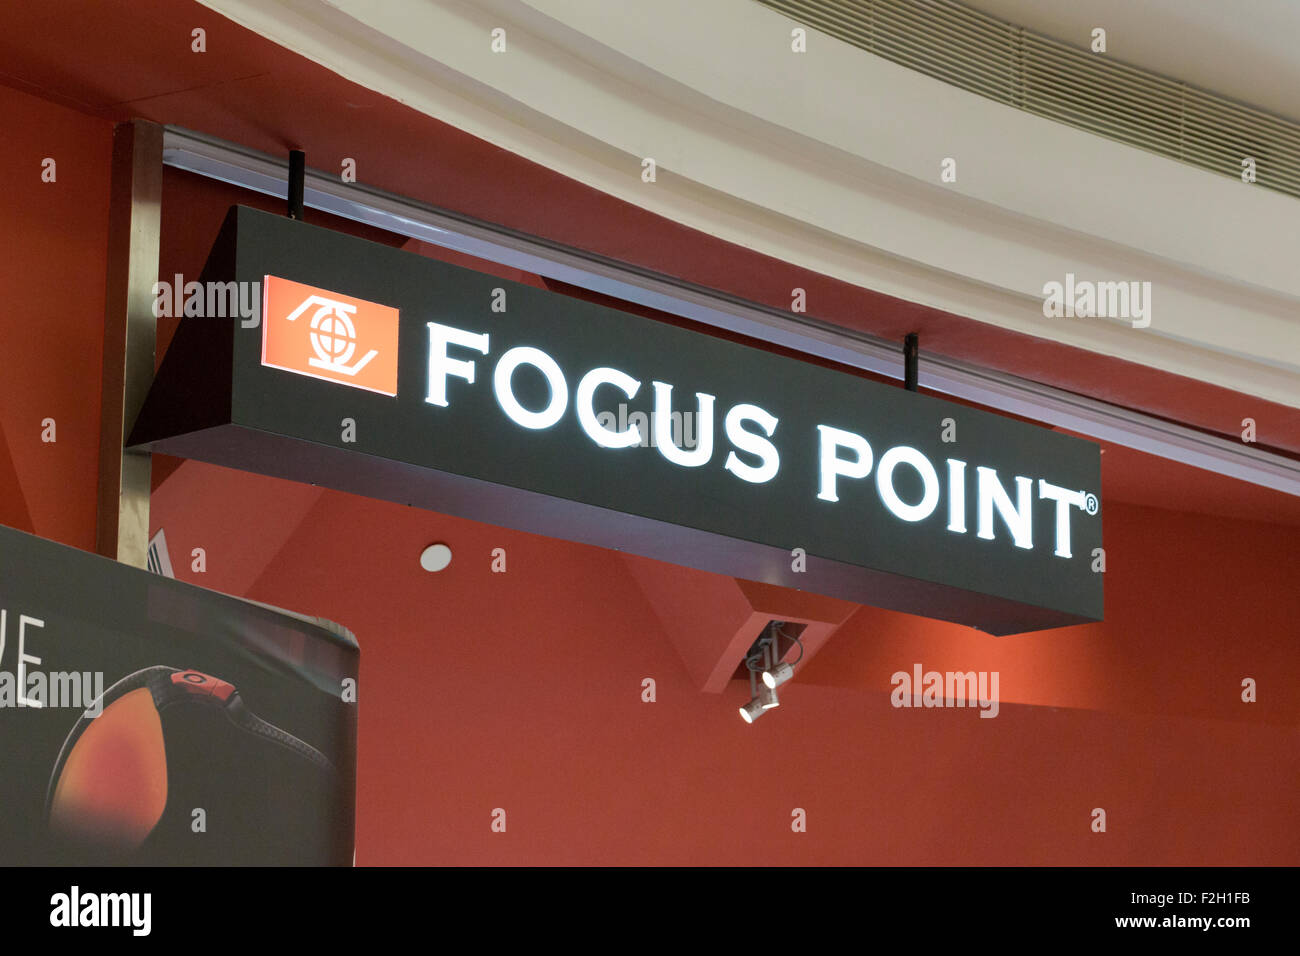 Focus point sign Stock Photo